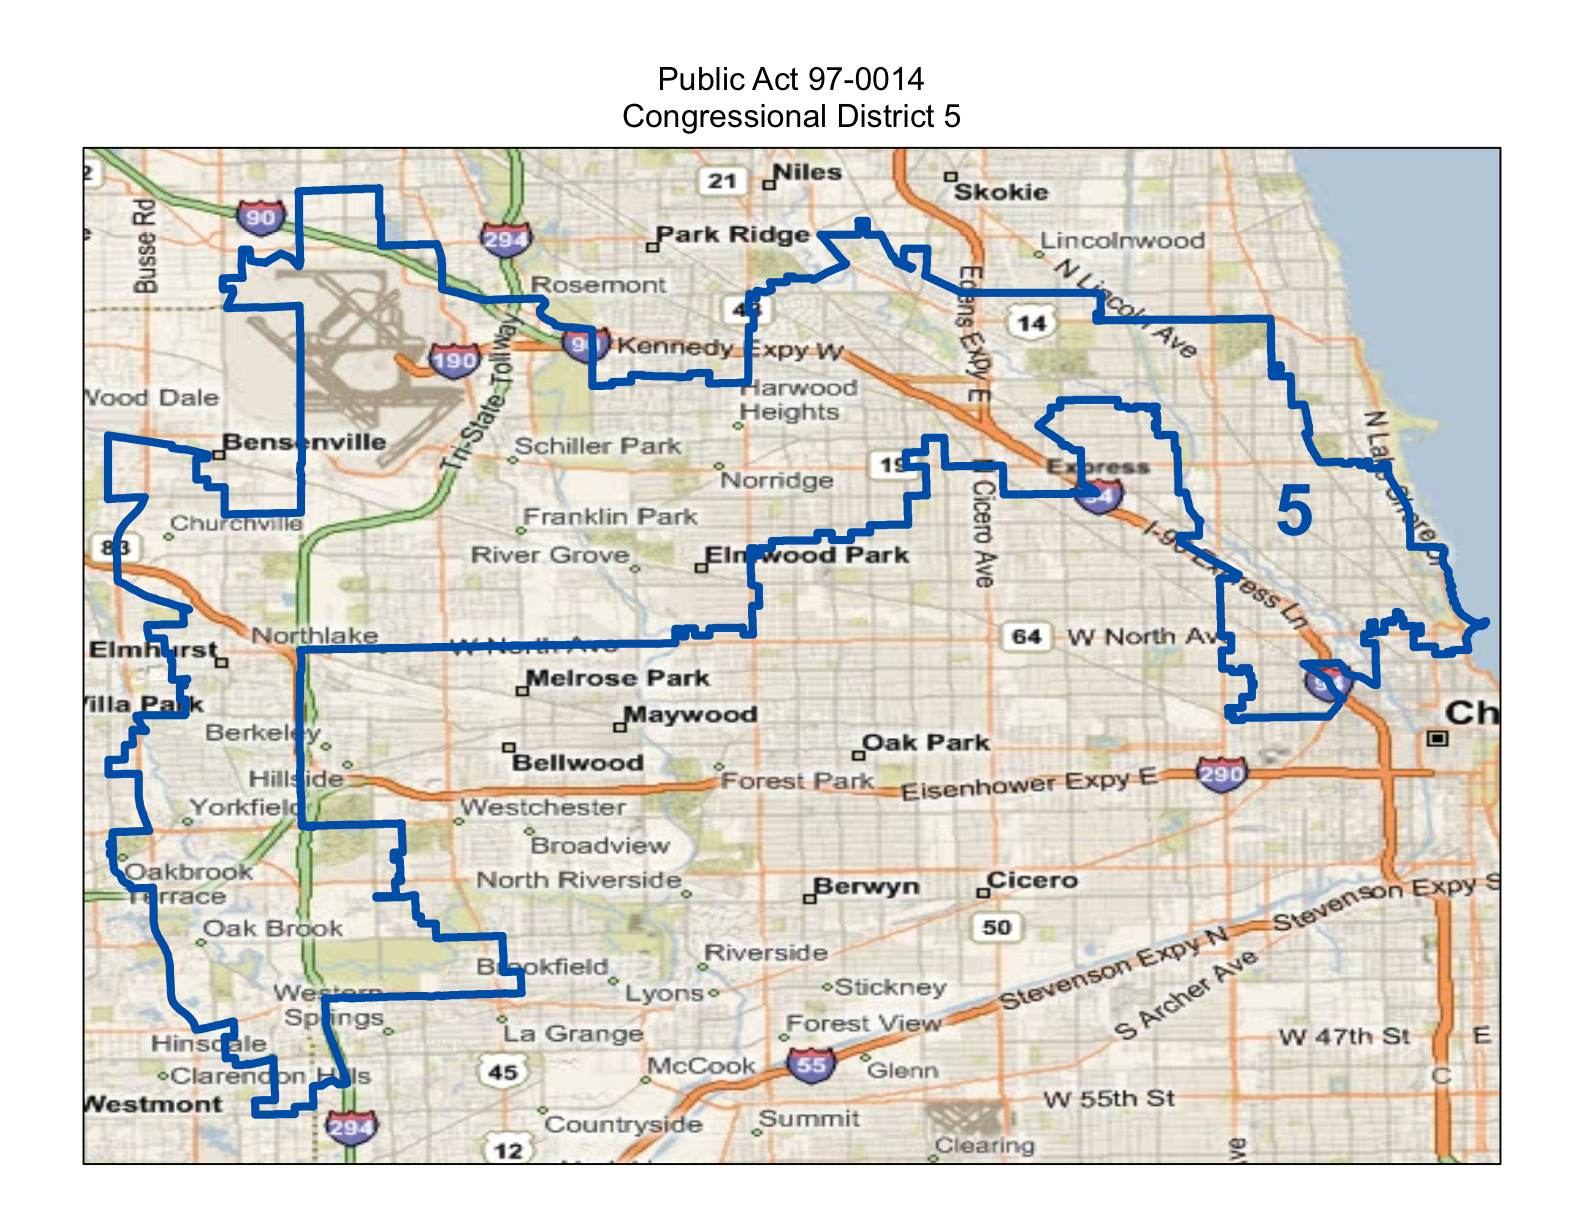 5th congressional district illinois map Will County Politics Maps Of Illinois Congressional Districts 2014 5th congressional district illinois map